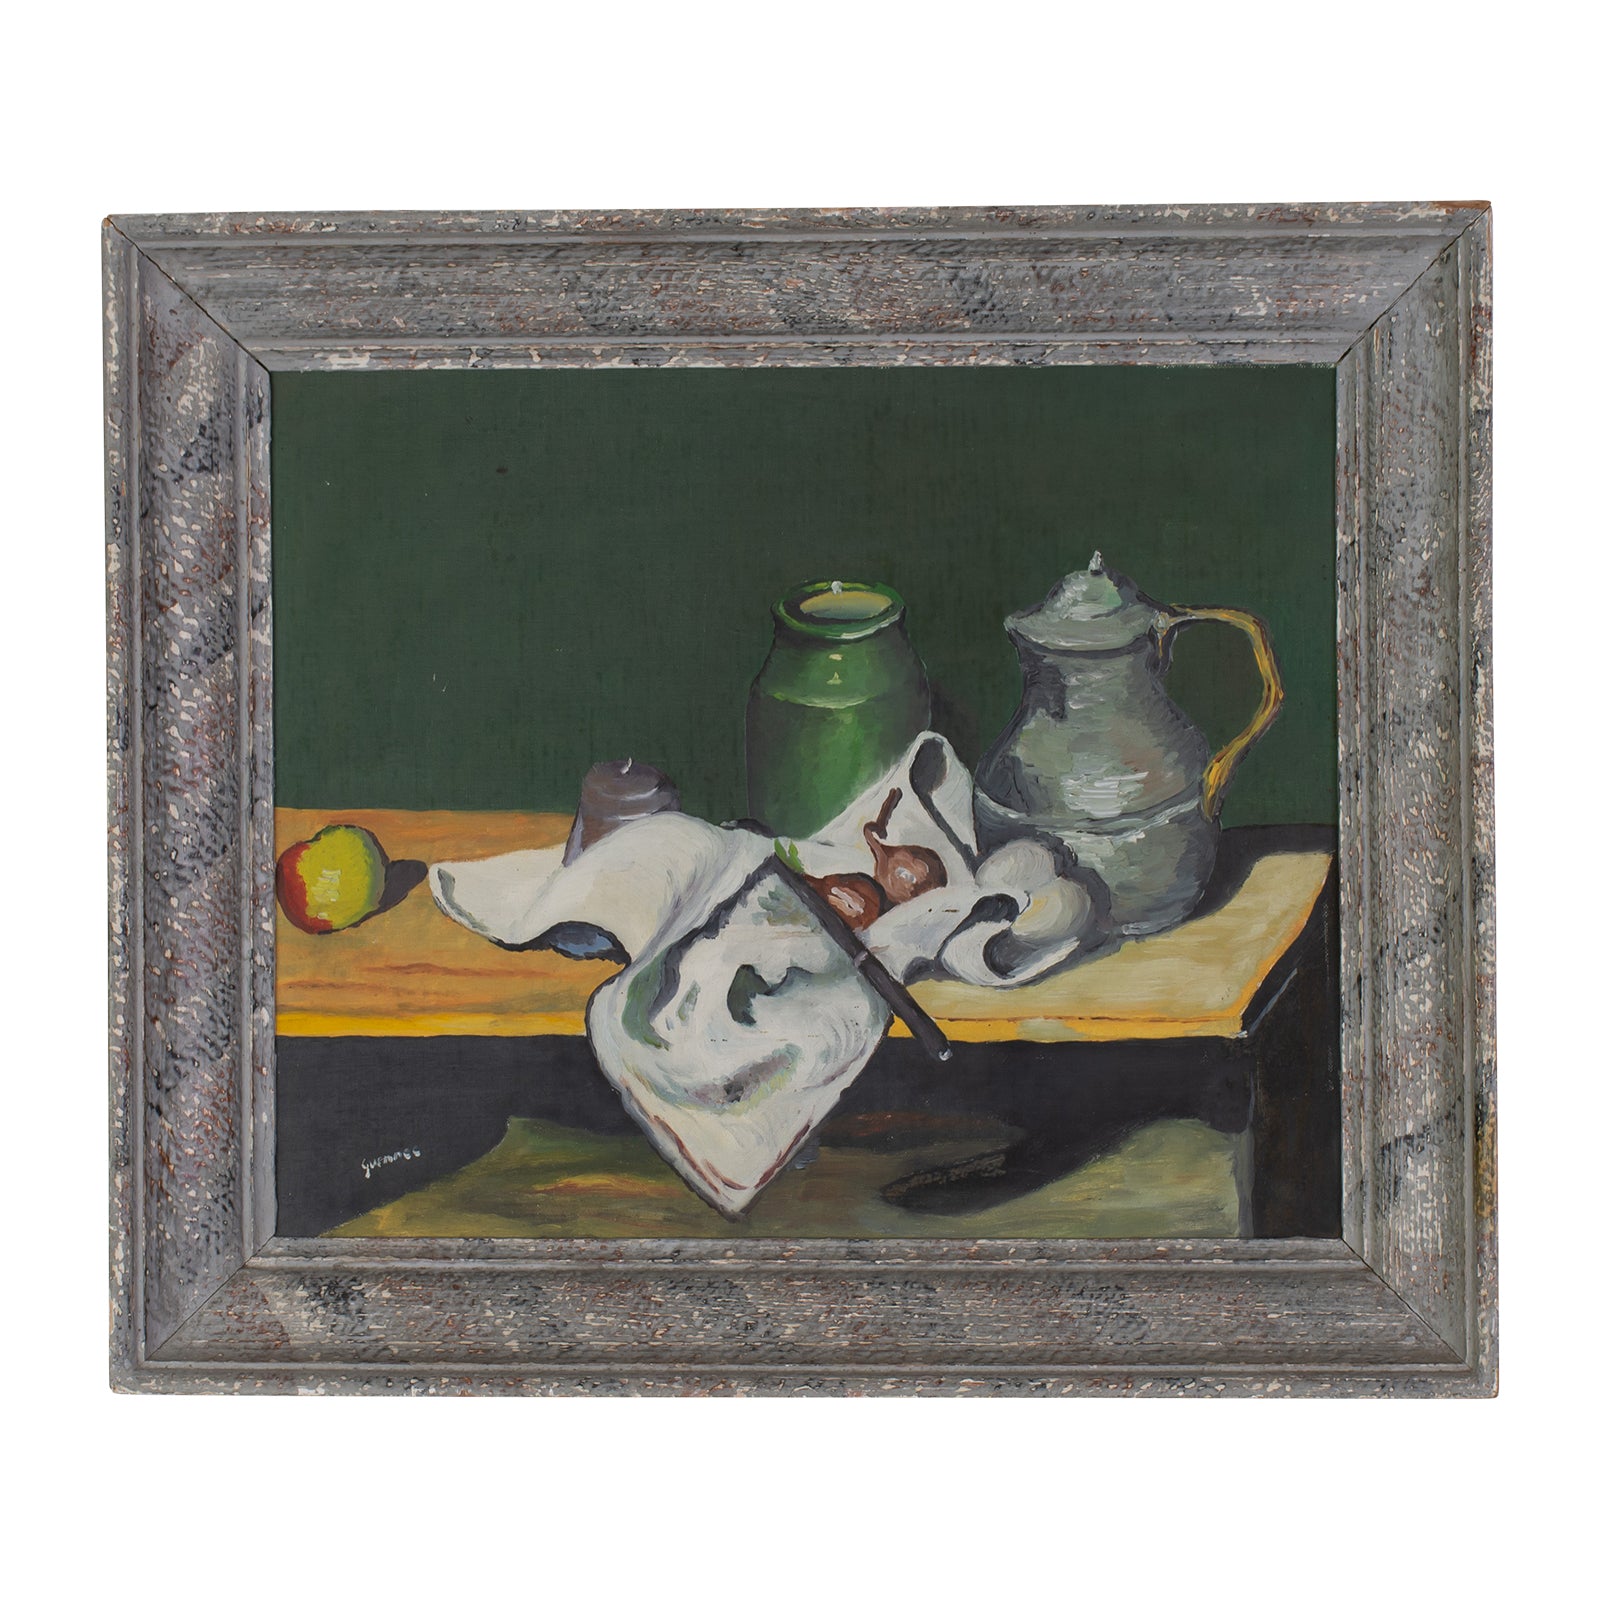 20th Century Still Life in the Manner of Cezanne